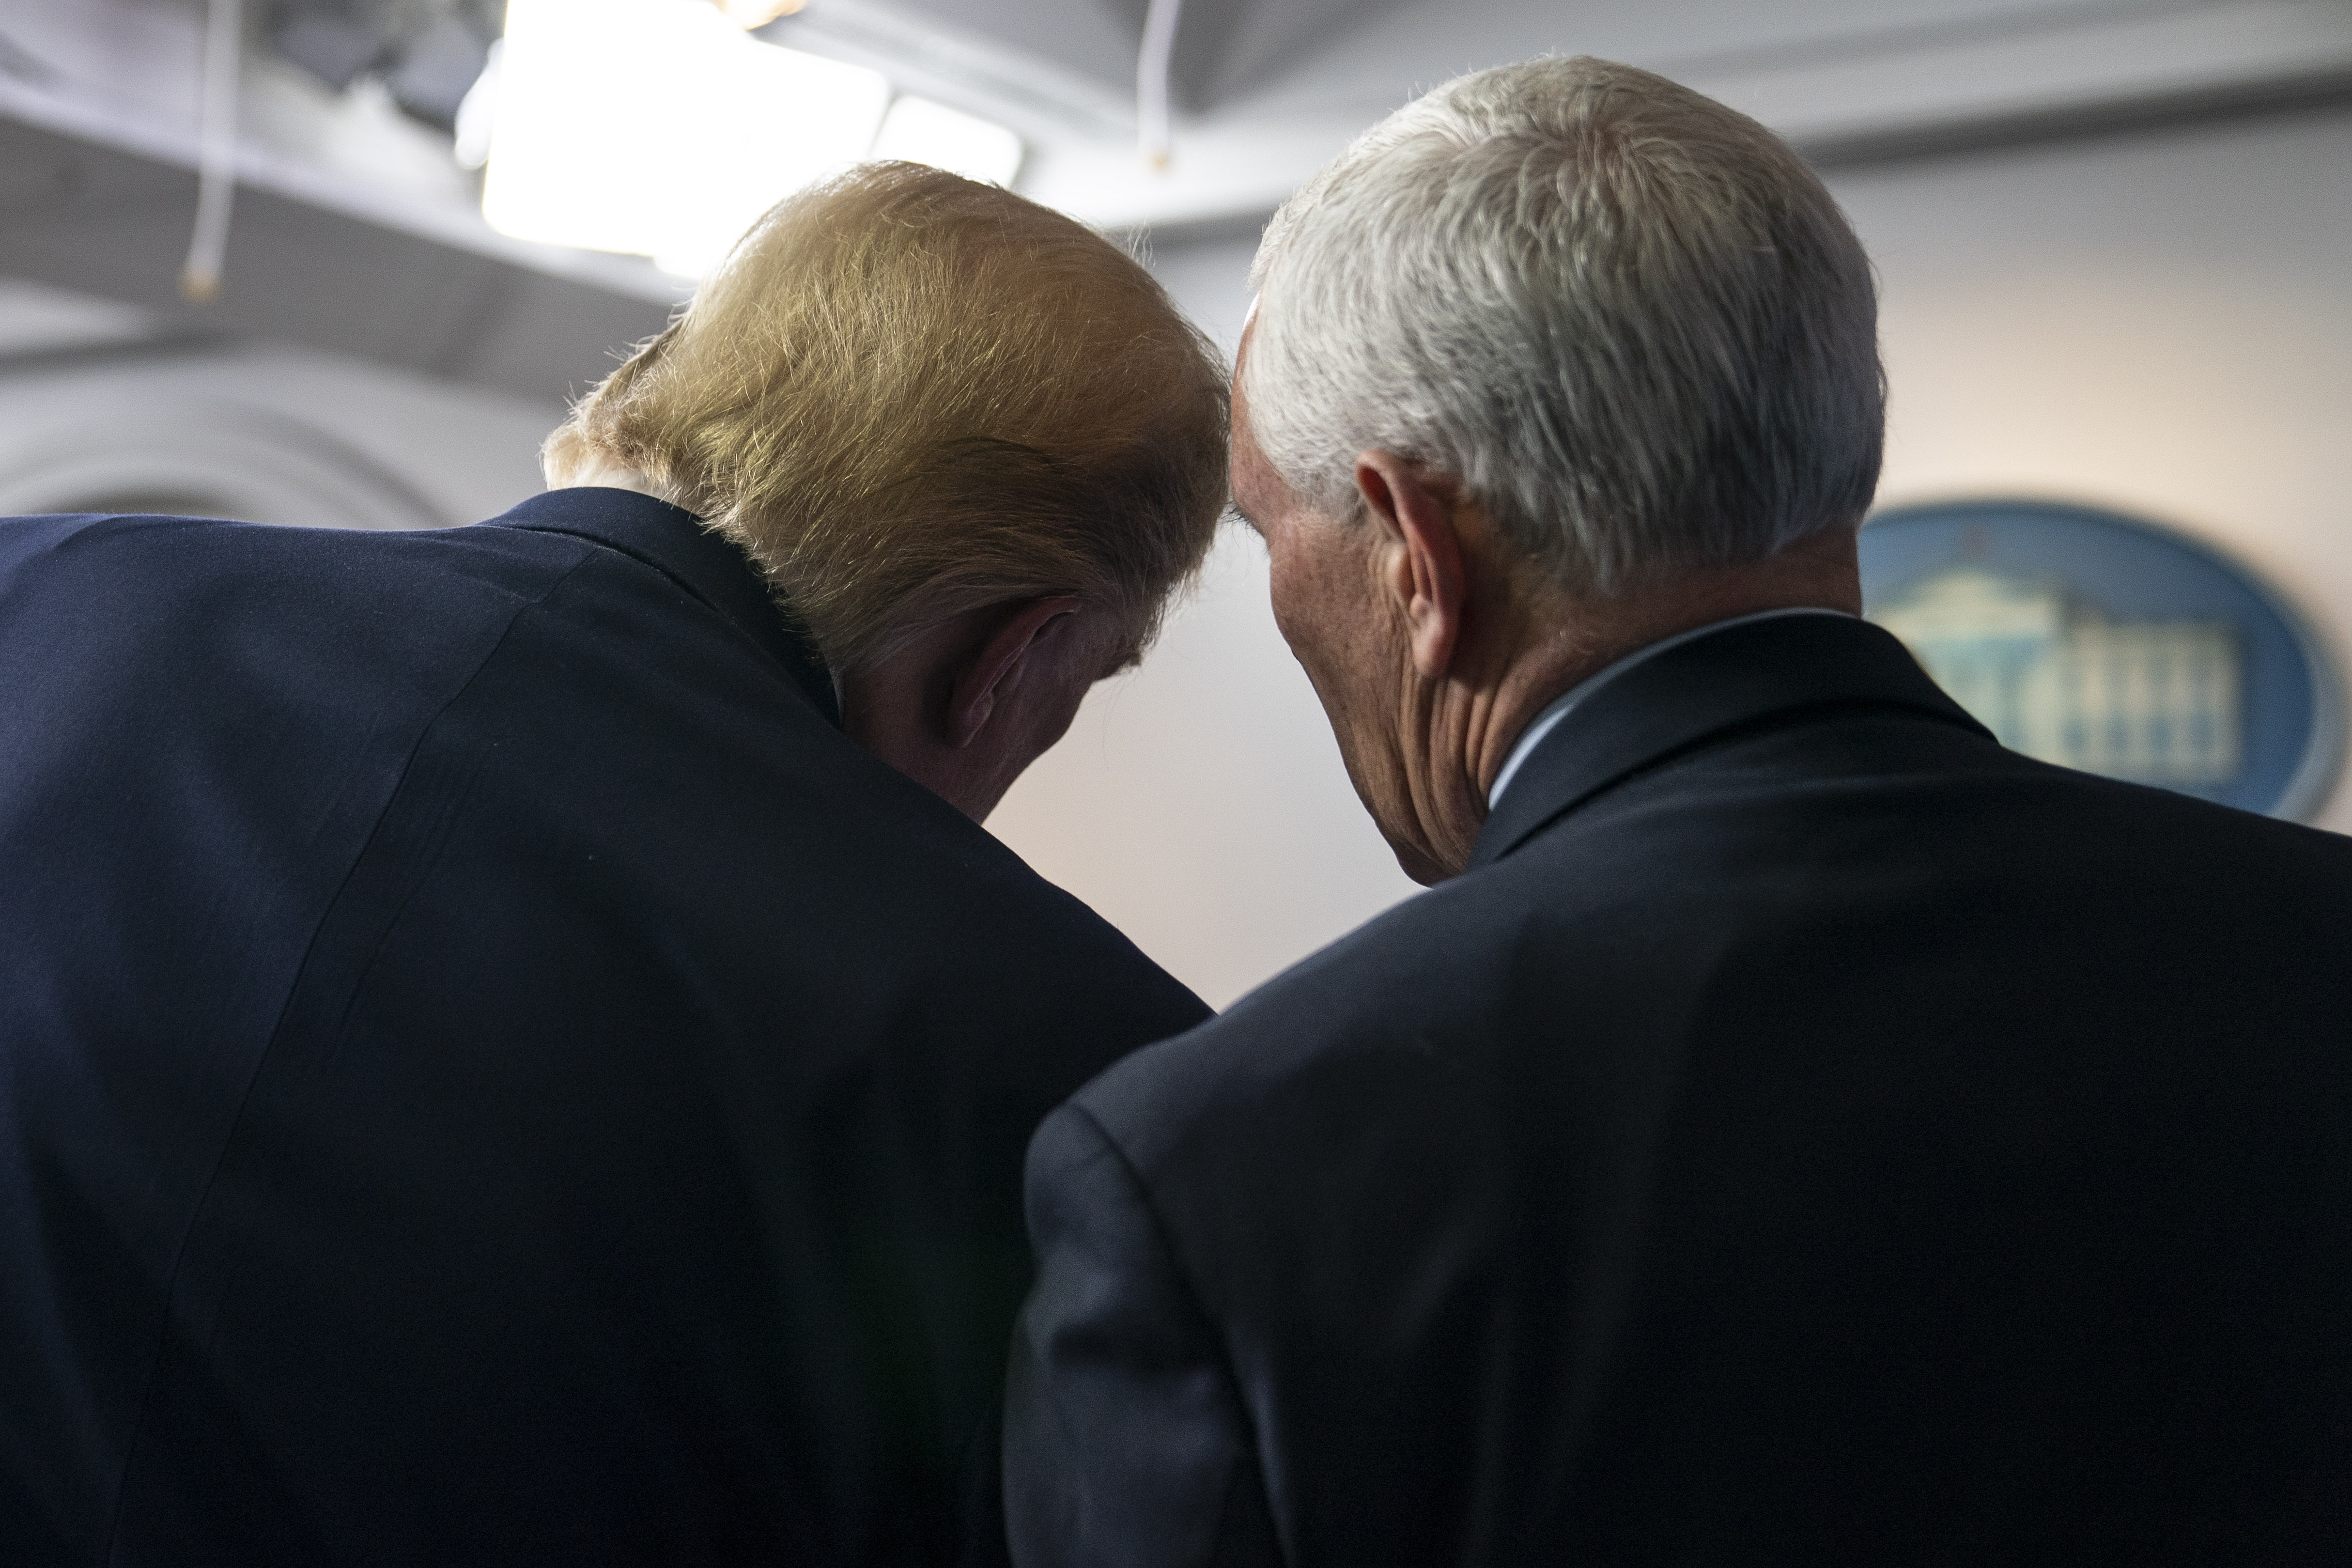 President Trump and Mike Pence.